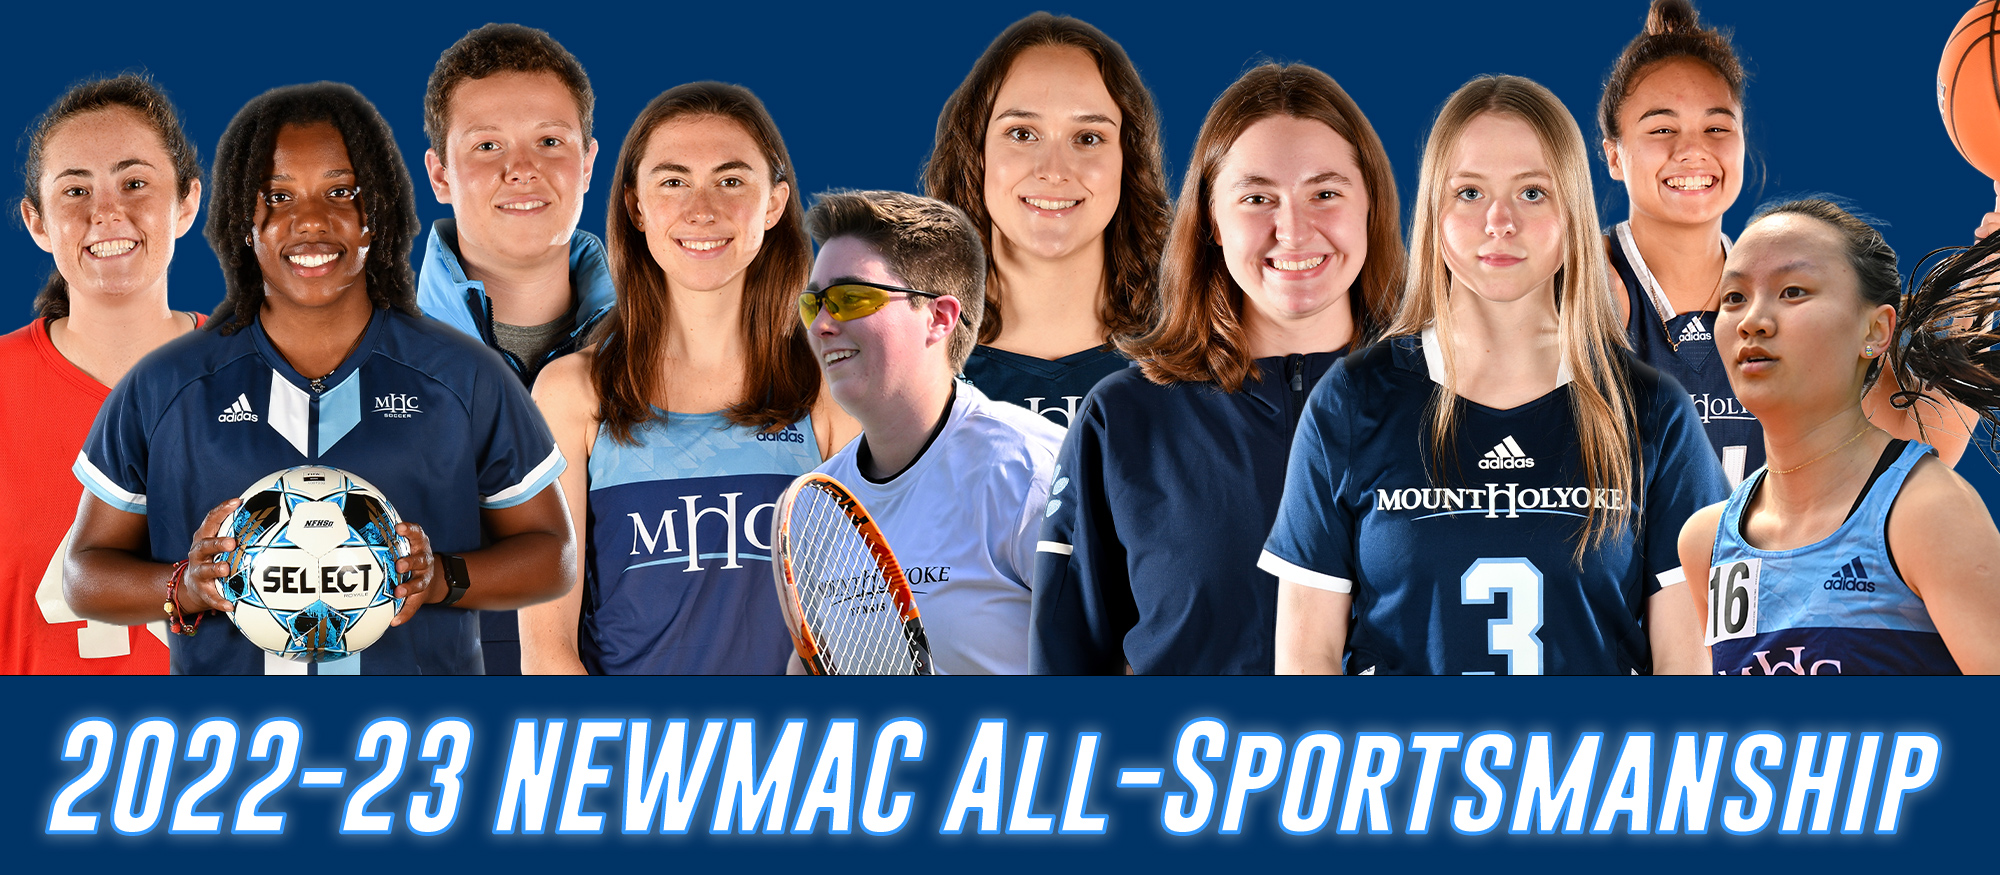 Earning NEWMAC All-Sportsmanship honors in 2022-23 from Mount Holyoke were (left to right): Rachel Katzenberg, Lo Jean-Jacques, Jocelyn Greer, Lily Nemirovsky, Cal Smith, McKenna Crosby, Emily Tarinelli, Langley Berat, Marley Berano, and Eliza Butler. (Photos by RJB Sports)